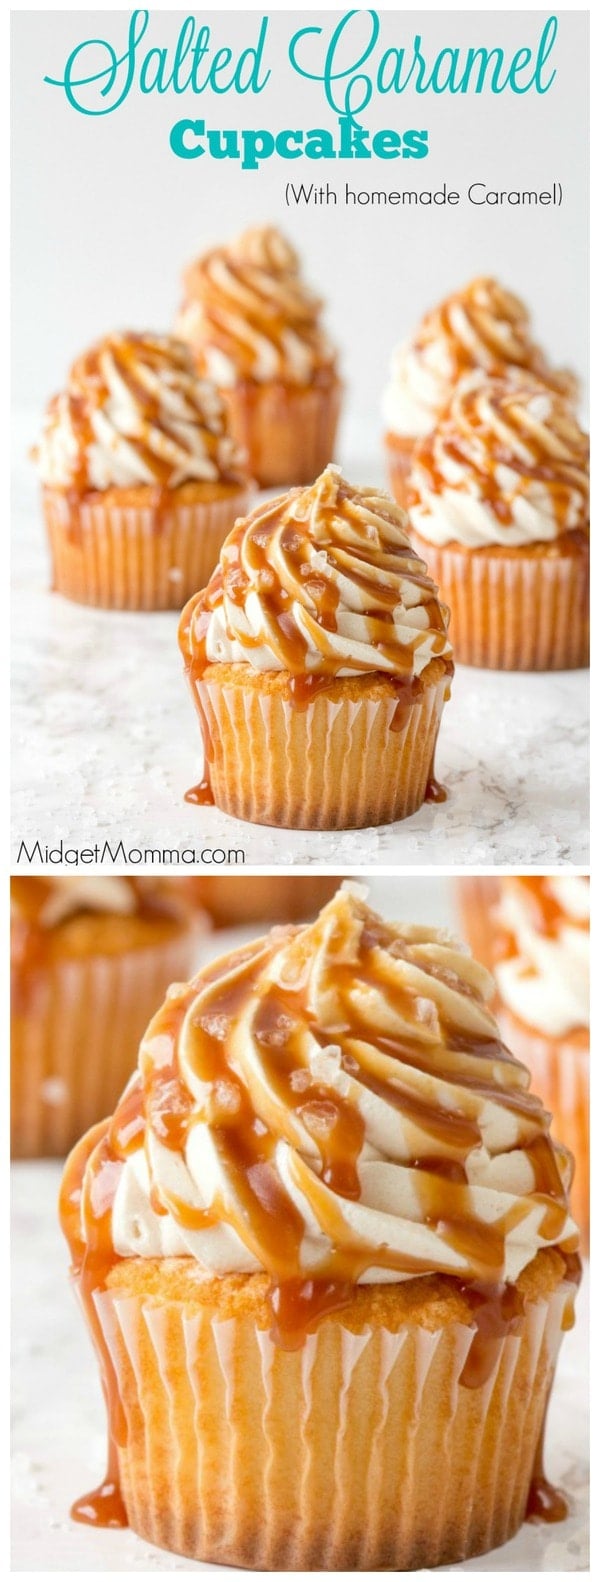 Salted Caramel Cupcakes with Homemade Caramel & Frosting